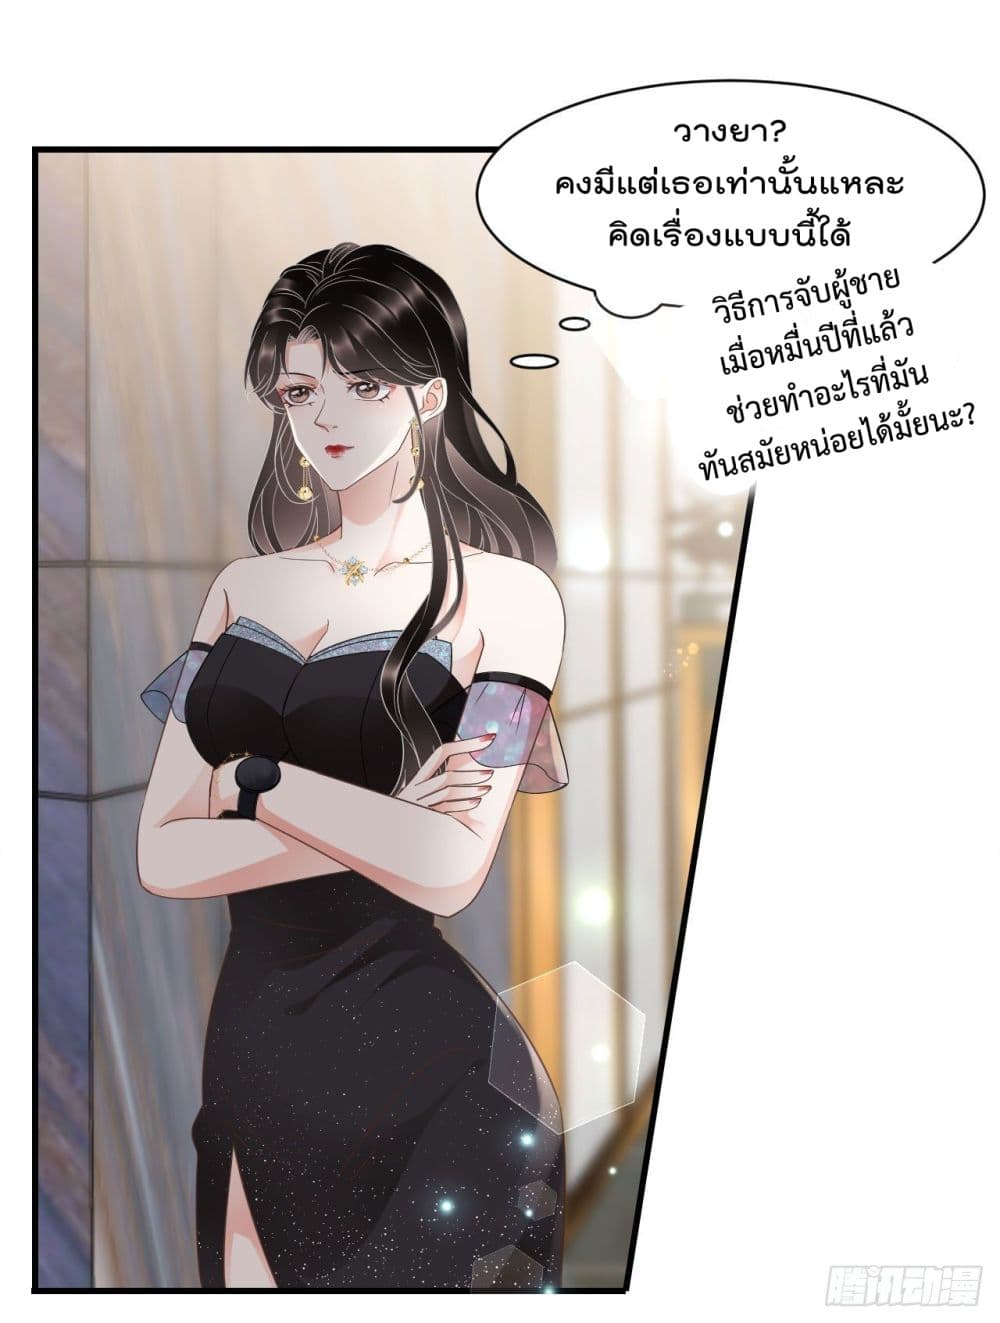 What Can the Eldest Lady Have คุณหนูใหญ่ ทำไมคุณร้ายอย่างนี้ 22-22